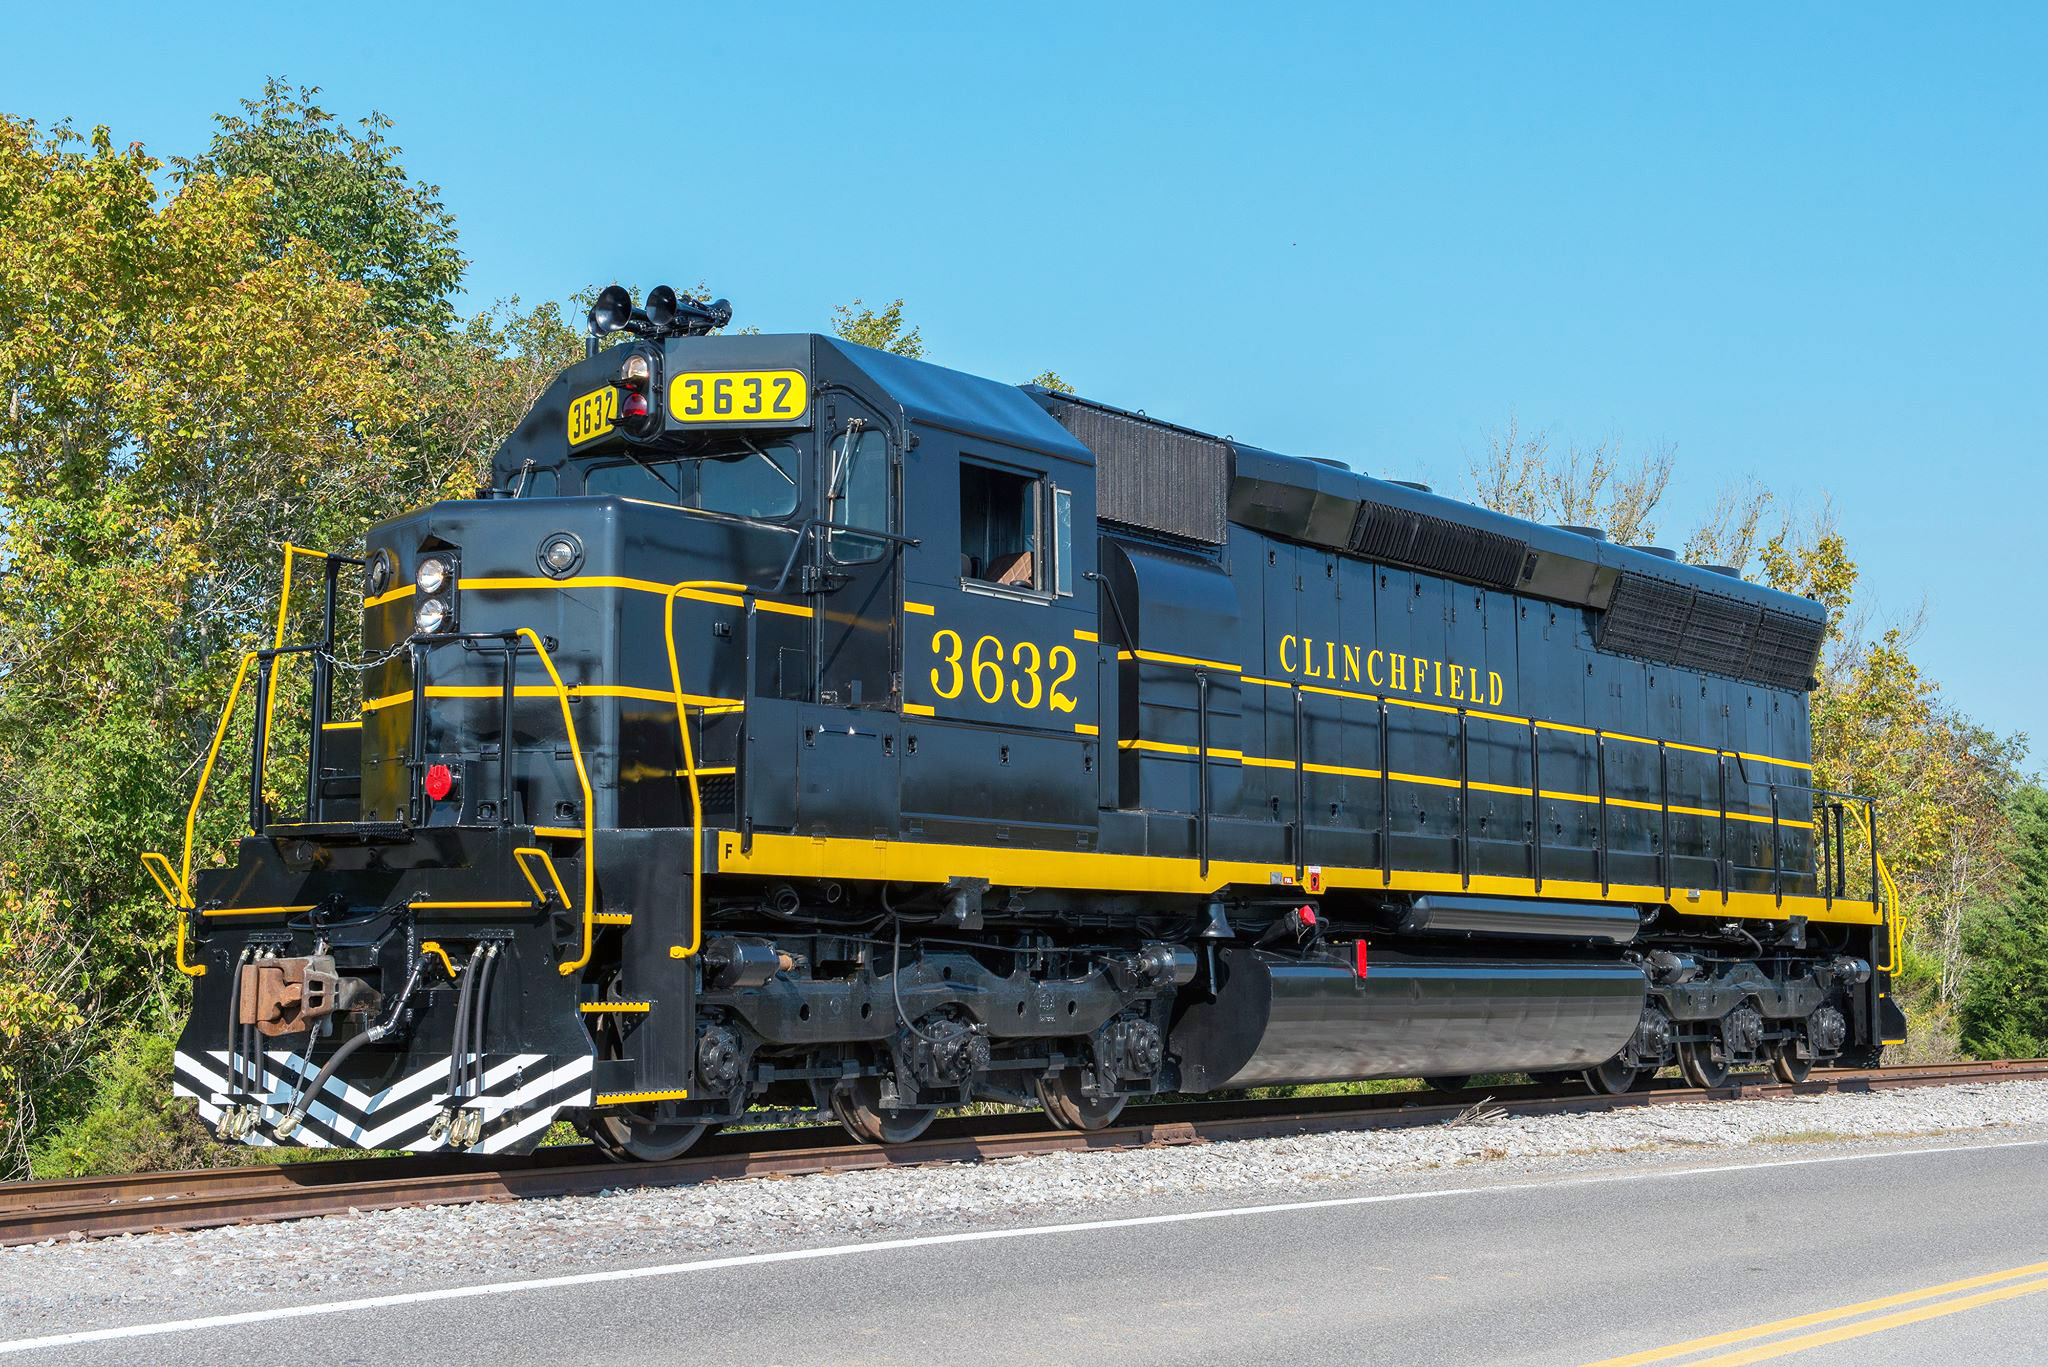 SD45 in black and yellow paint and Clinchfield lettering